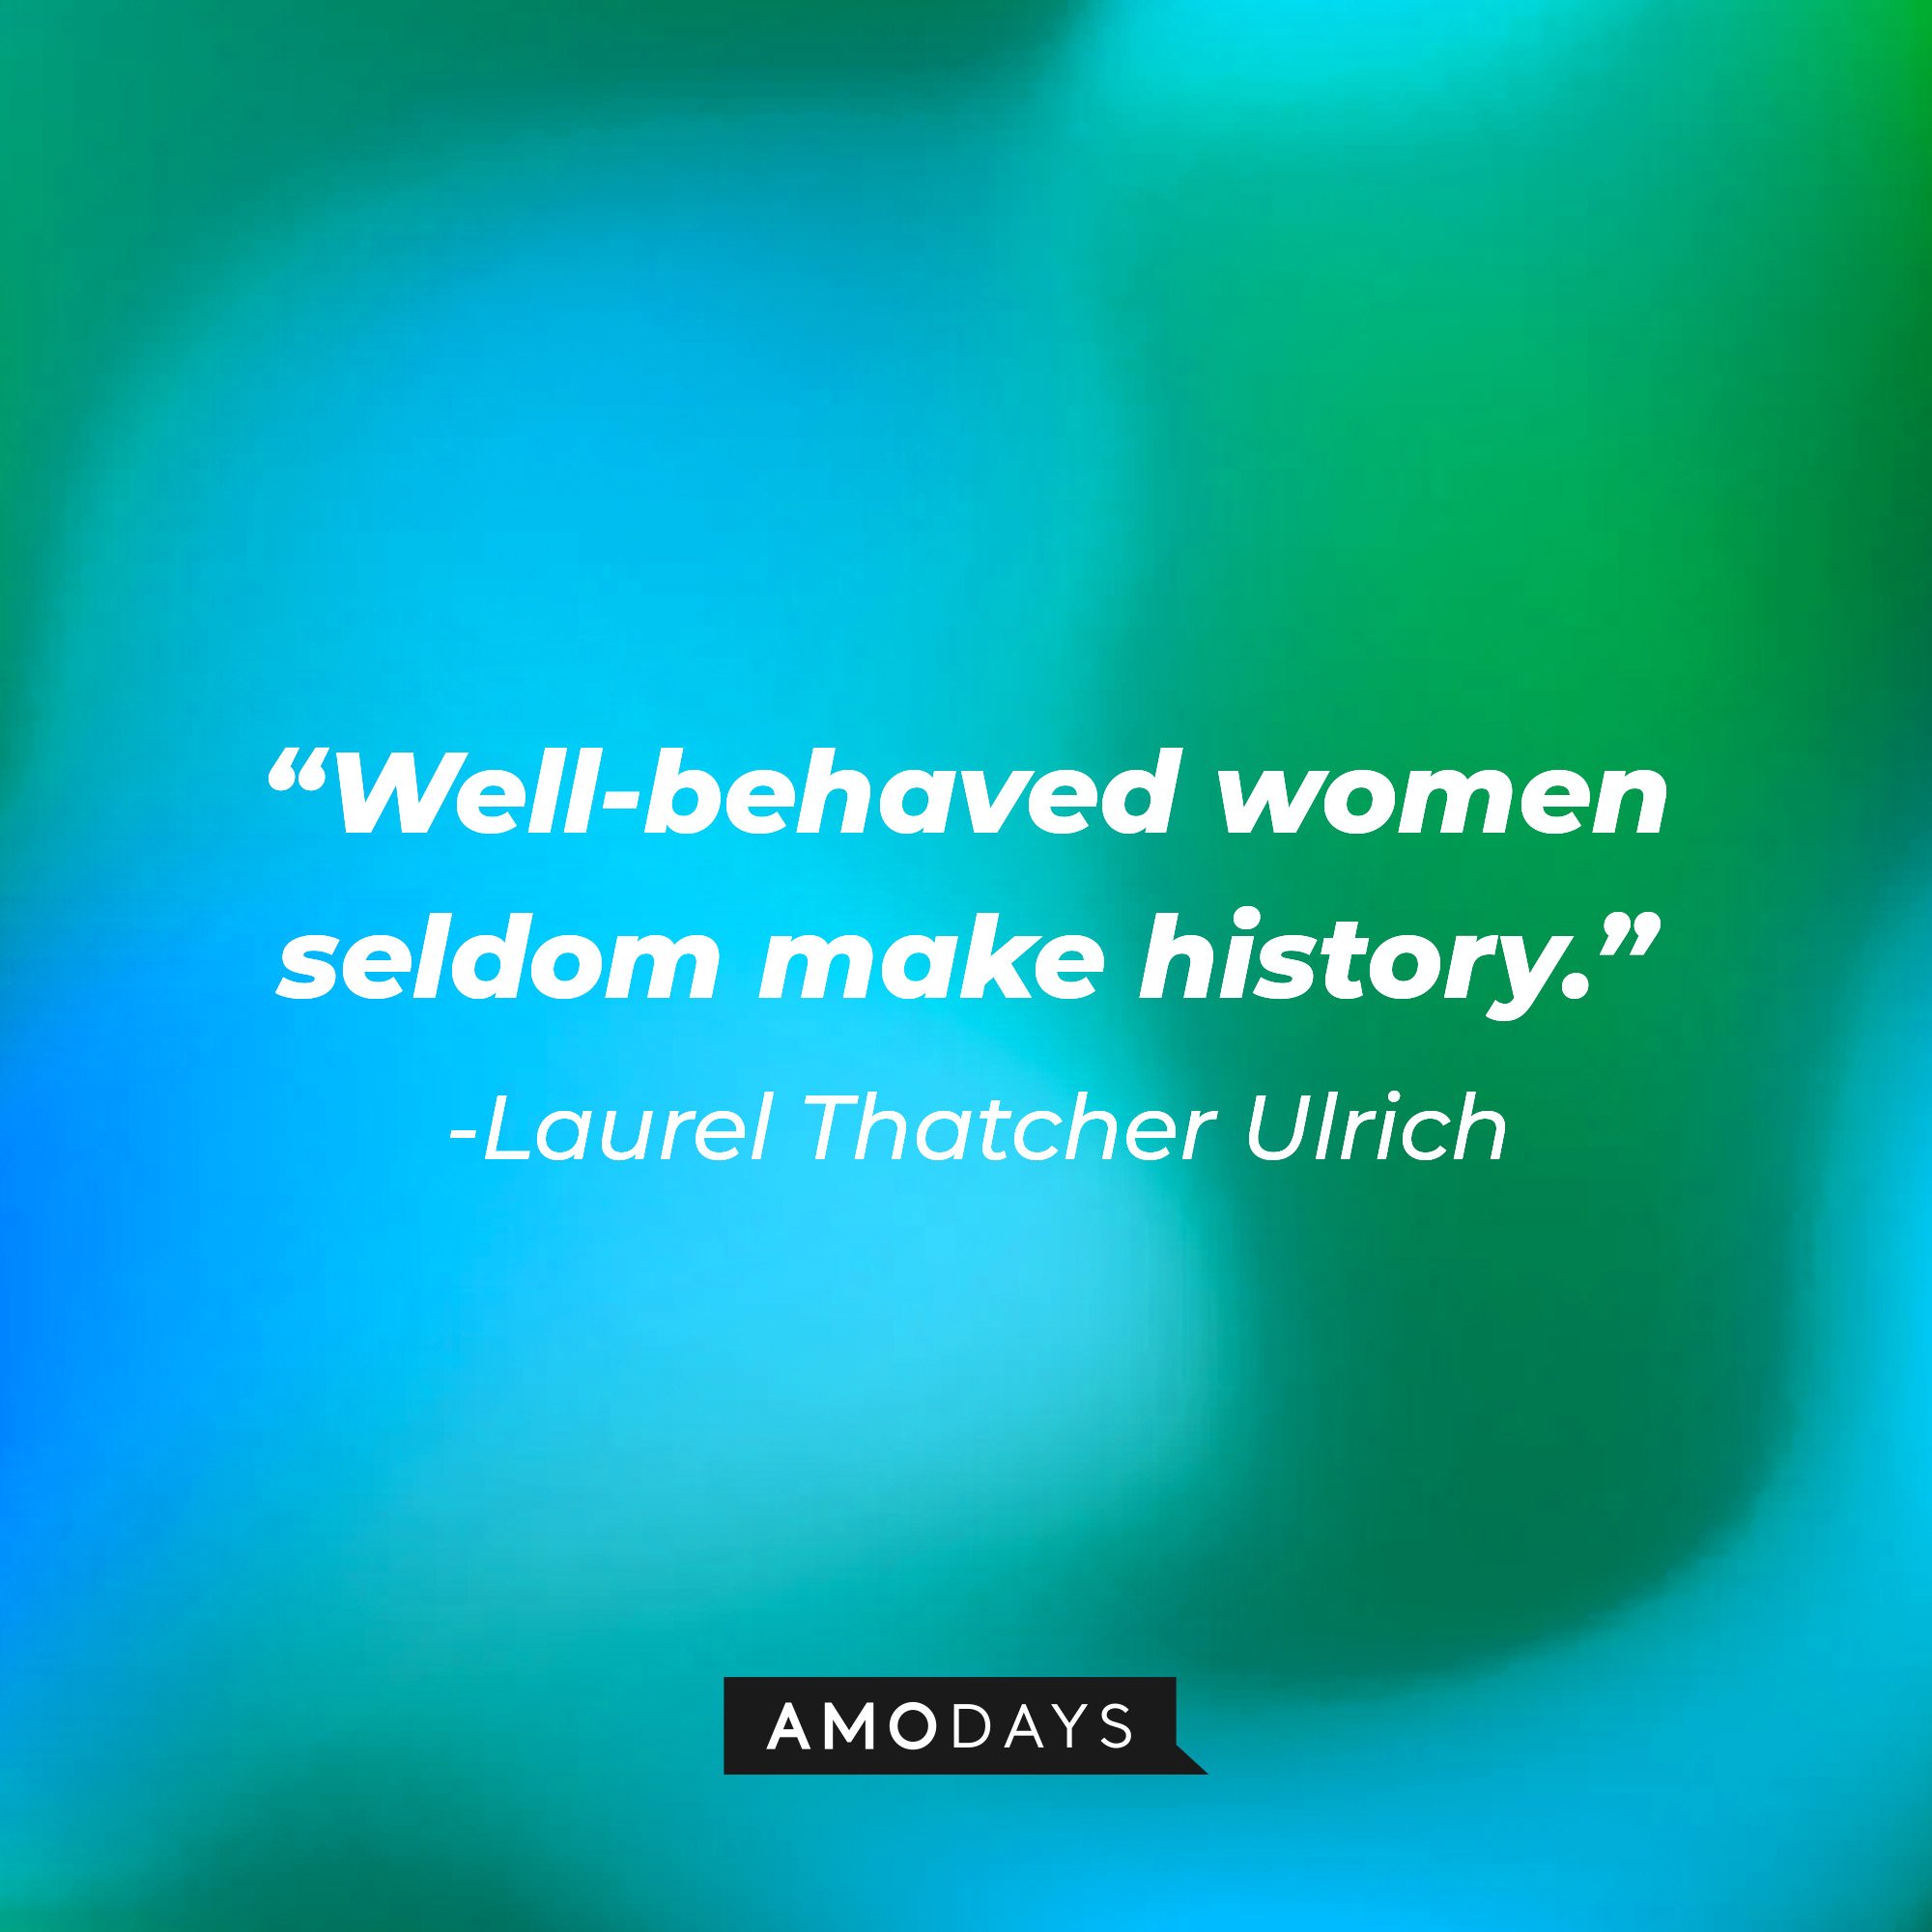 Laurel Thatcher Ulrich’s quote: “Well-behaved women seldom make history.”  | Image: Amodays